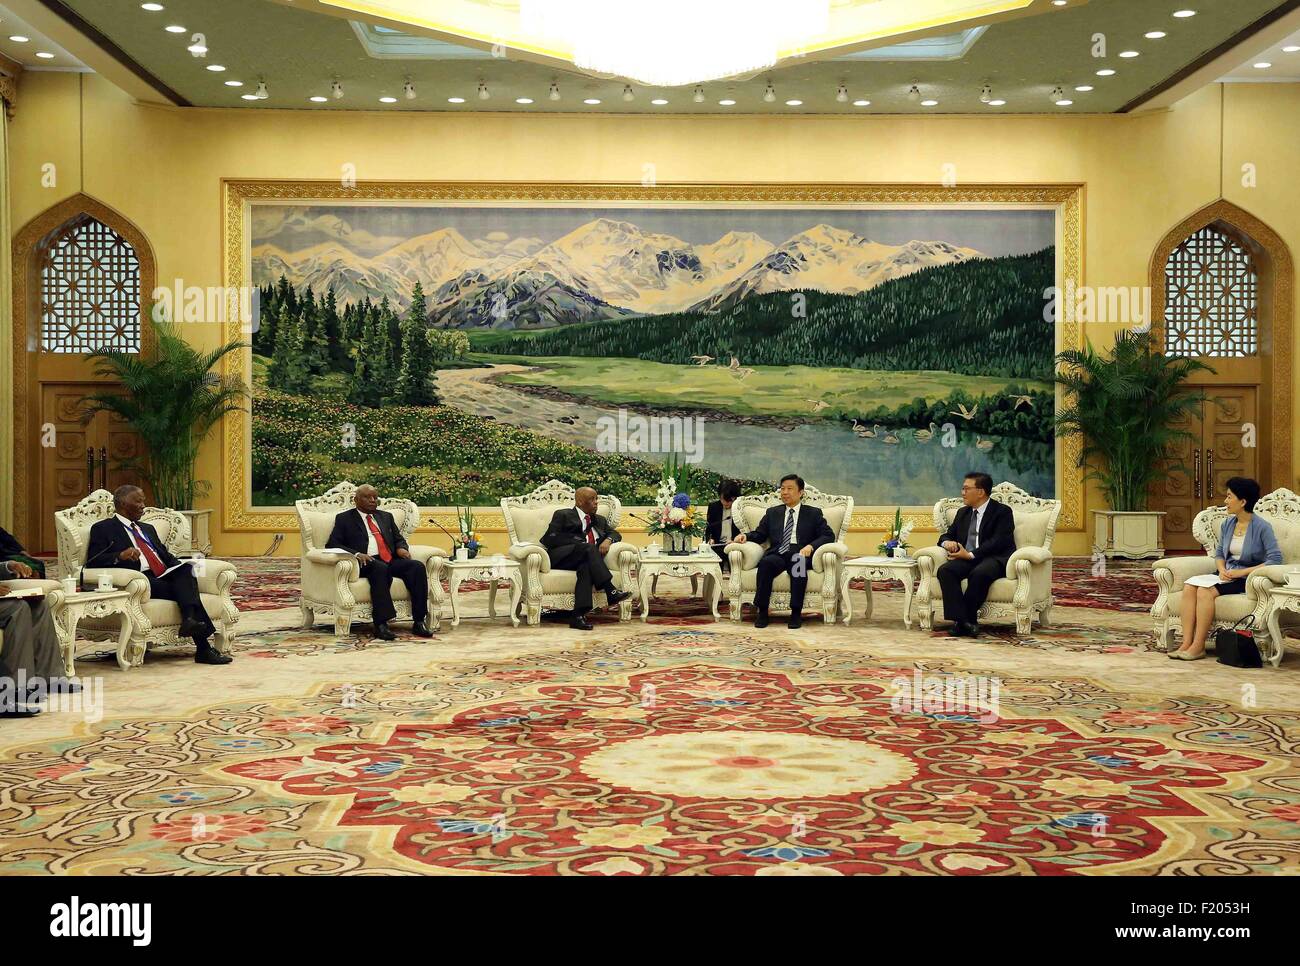 Beijing, China. 9th Sep, 2015. Chinese Vice President Li Yuanchao (3rd R) meets with Botswana's former President Festus Mogae (3rd L), Mozambique's former President Armando Guebuza (2nd L) and South African former President Thabo Mbeki (1st L) in Beijing, capital of China, Sept. 9, 2015. © Liu Weibing/Xinhua/Alamy Live News Stock Photo